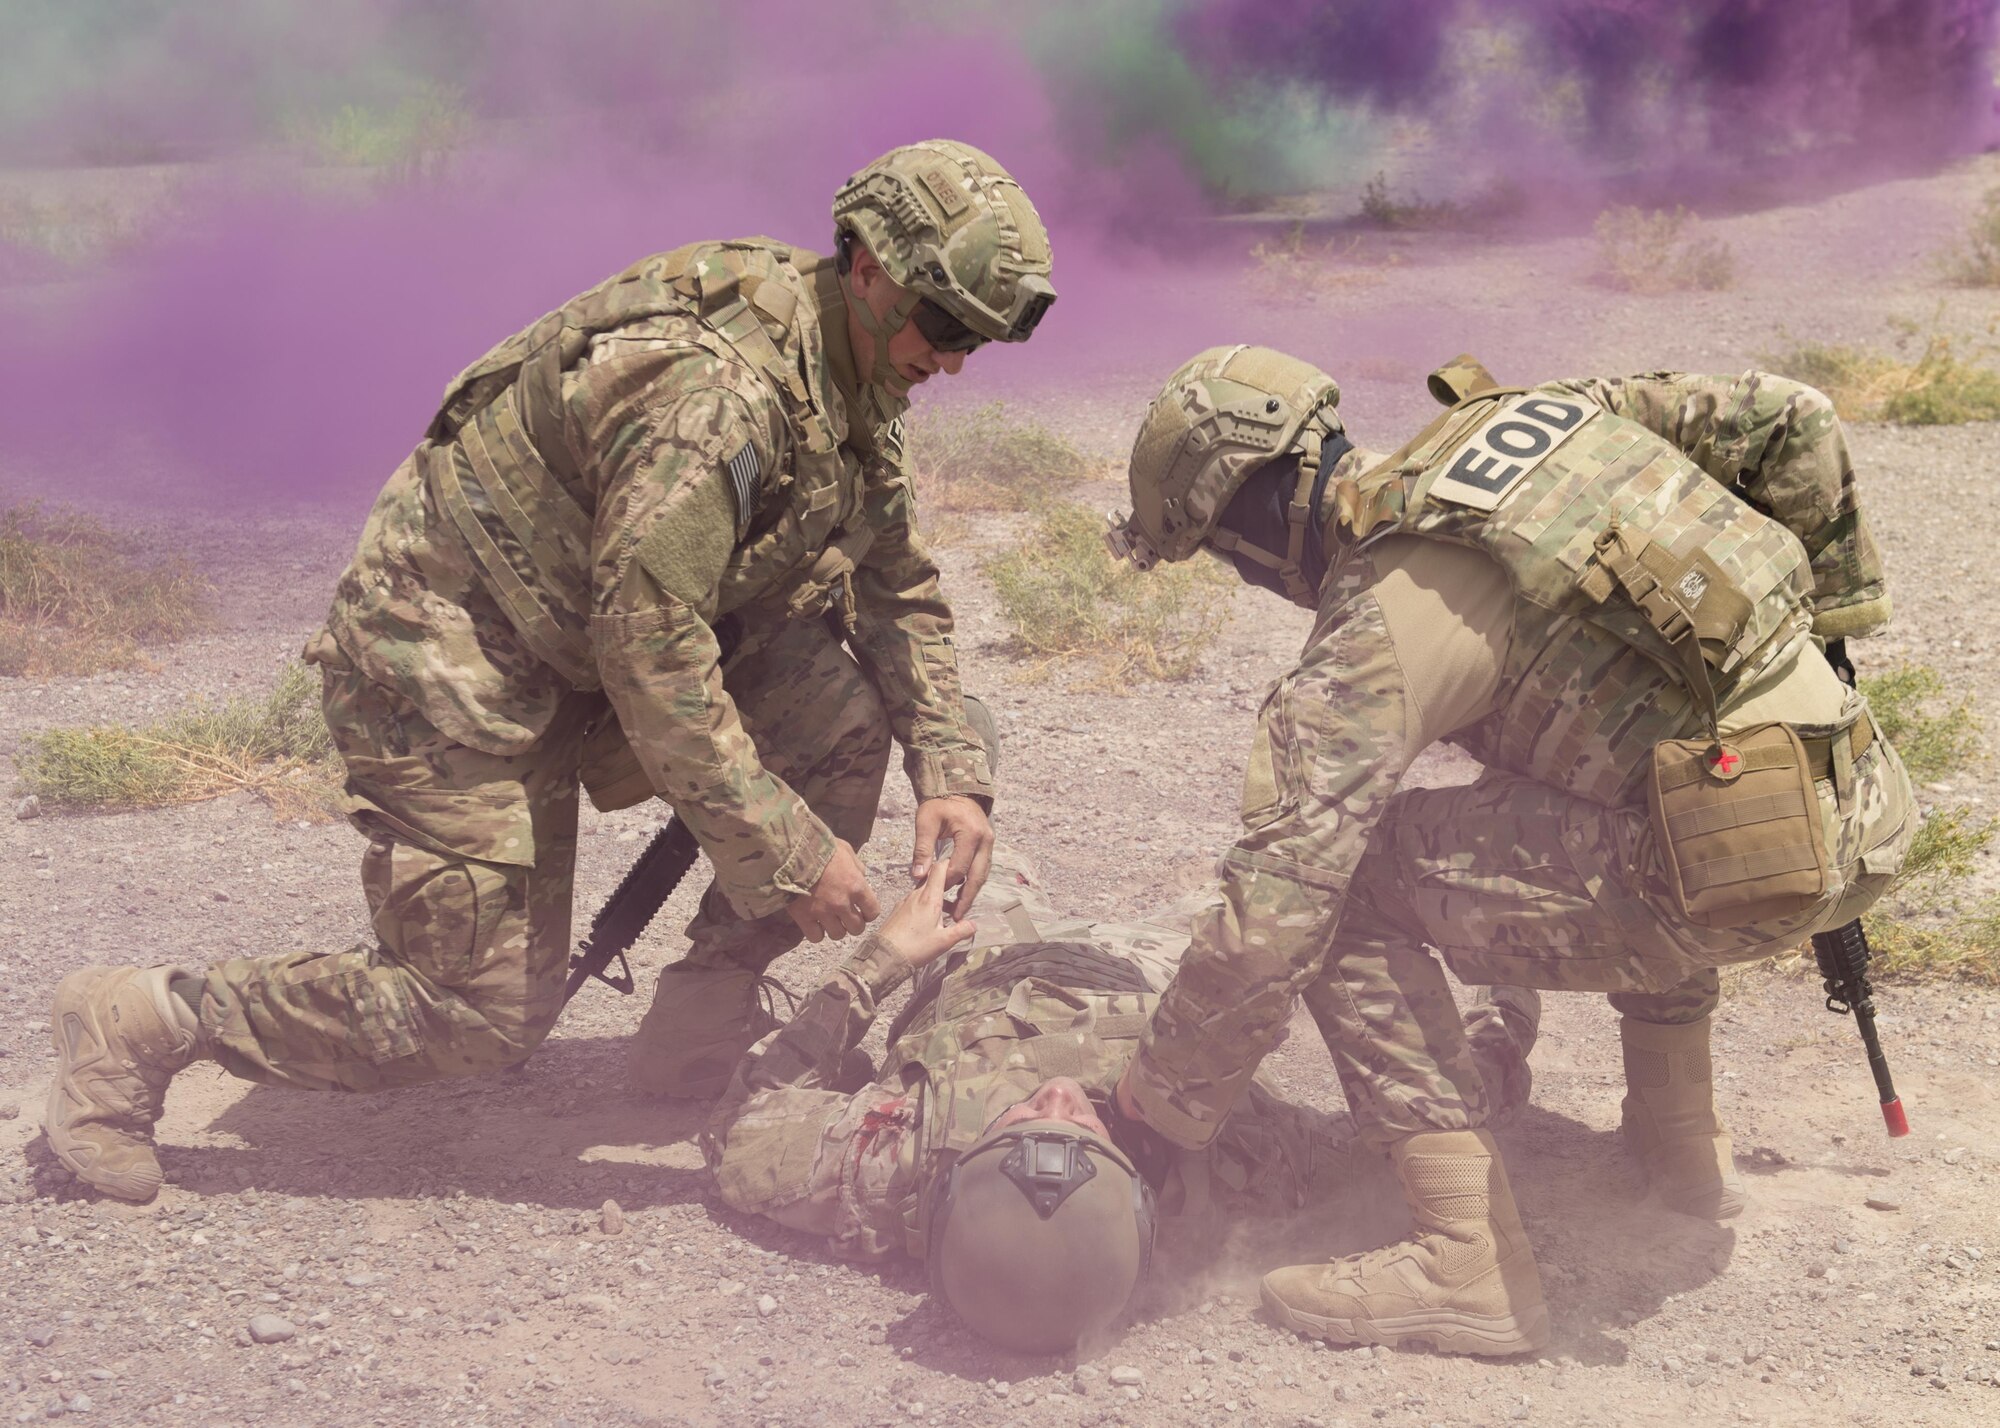 Explosive Ordnance Disposal Airmen check for life-signs on a simulated casualty during a Tactical Combat Casualty Care exercise at Holloman Air Force Base, N.M., on April 31, 2017. The training focuses on individual trauma, tools, techniques, and treatment procedures. The exercise also included the use of moulage, non-lethal training munitions, trained role-players, and a multitude of other artificial stressors. (U.S. Air Force Photo by Senior Airman Chase Cannon)